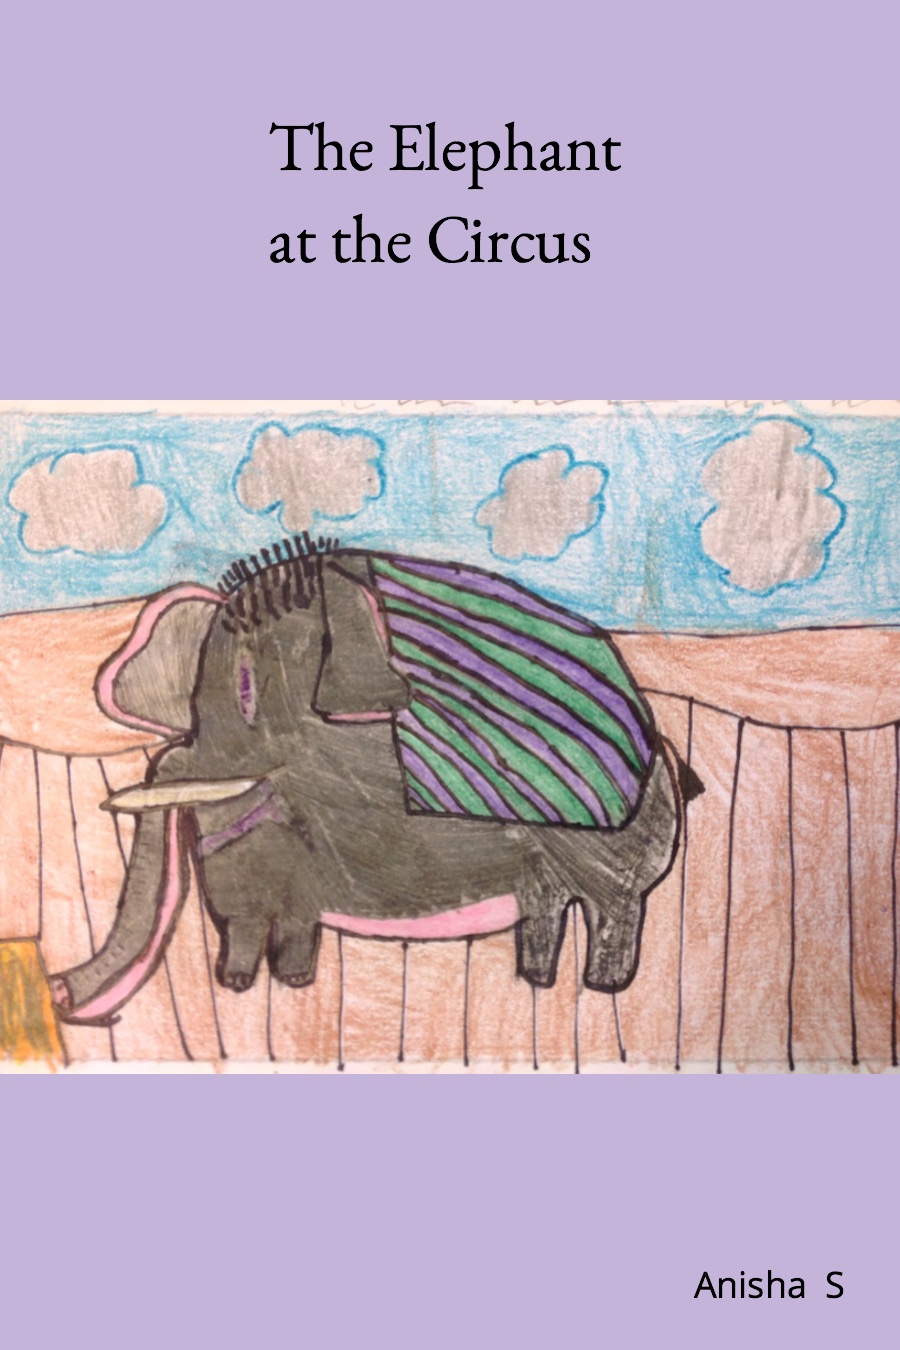 An Elephant at the Circus by Anisha S